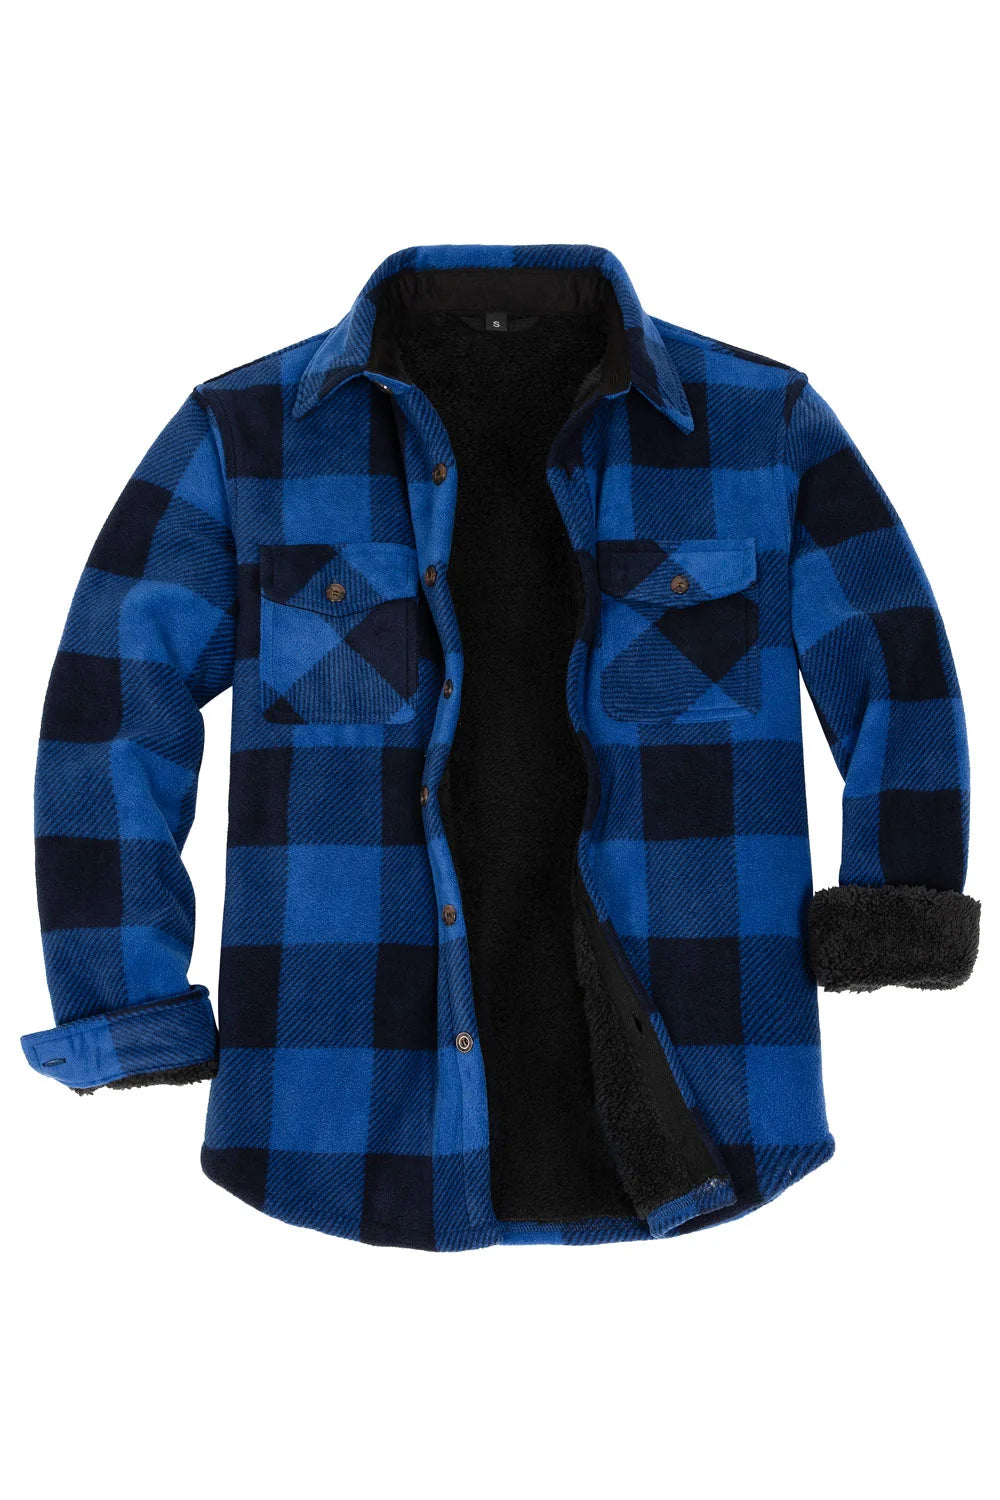 FlannelGo Men's Warm Sherpa Lined Plaid Shirt Jacket (Sherpa Lined Throughout)